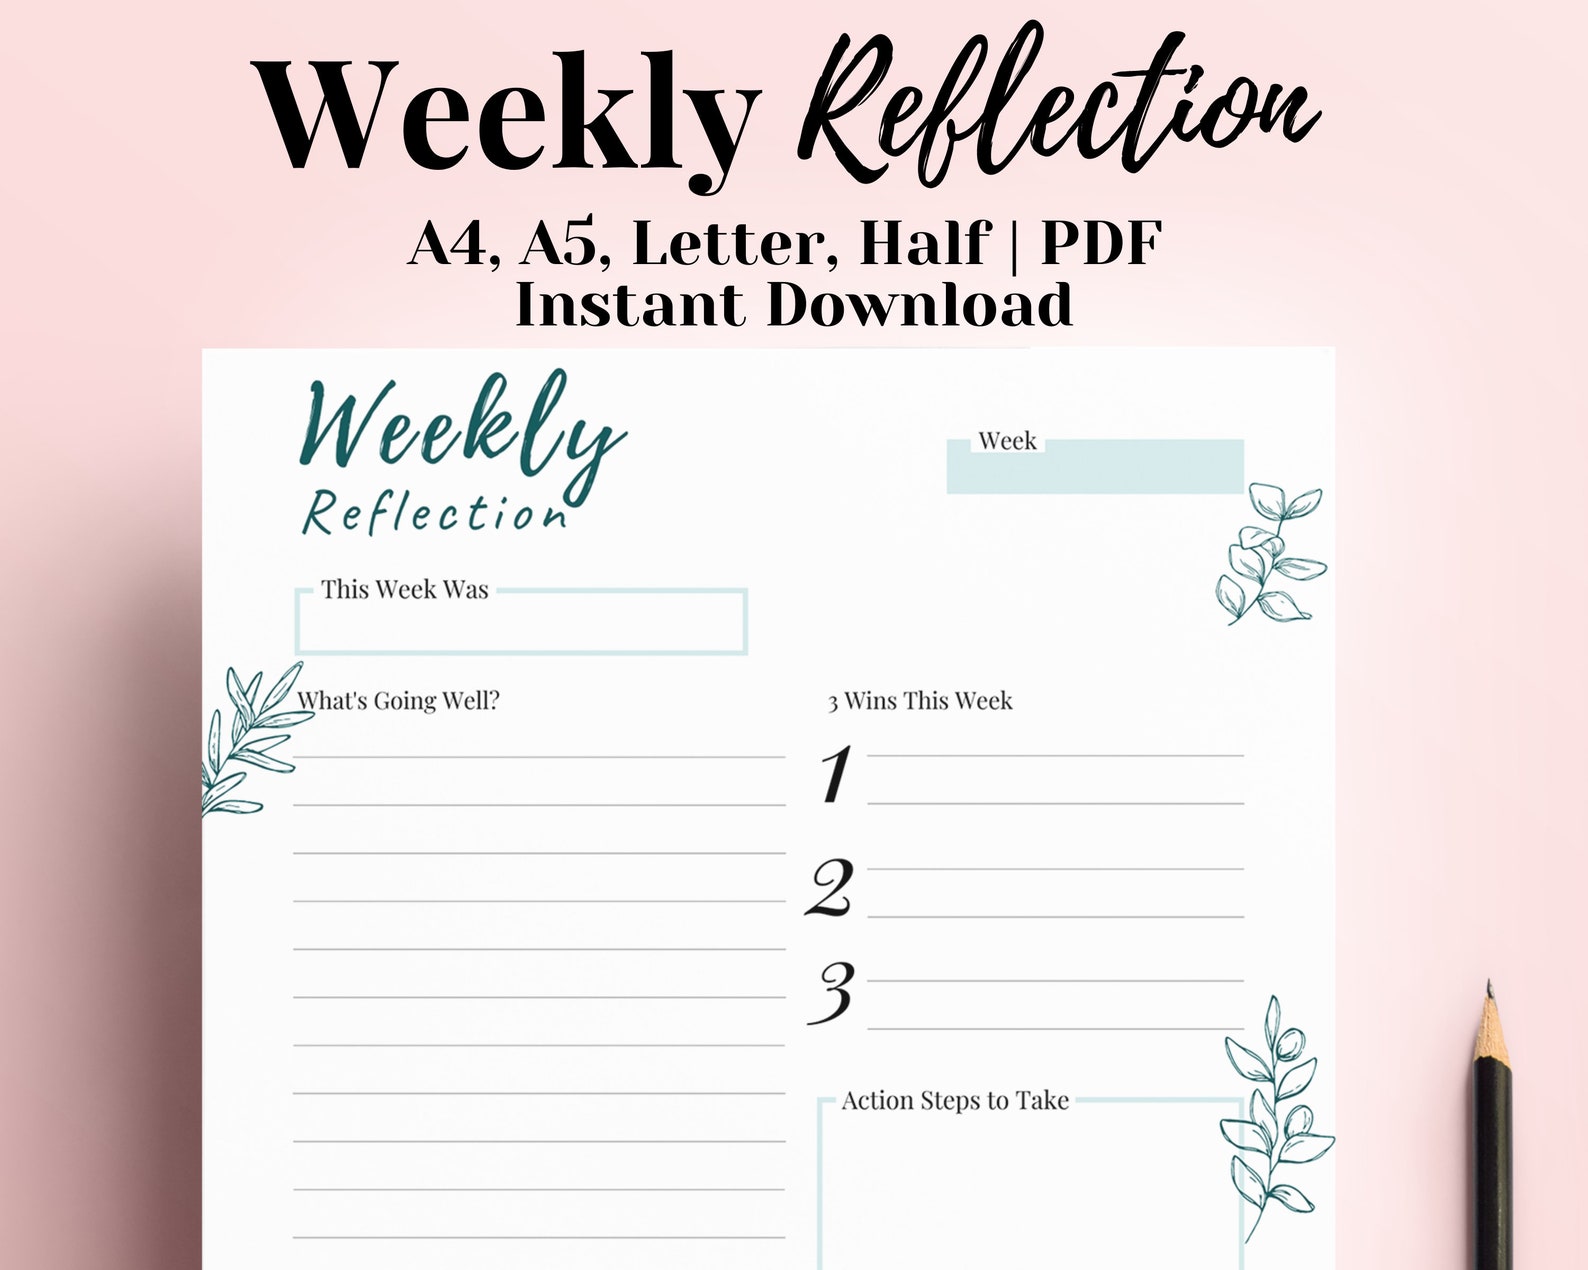 weekly-reflection-journal-weekly-review-2021-weekly-planner-etsy-hong